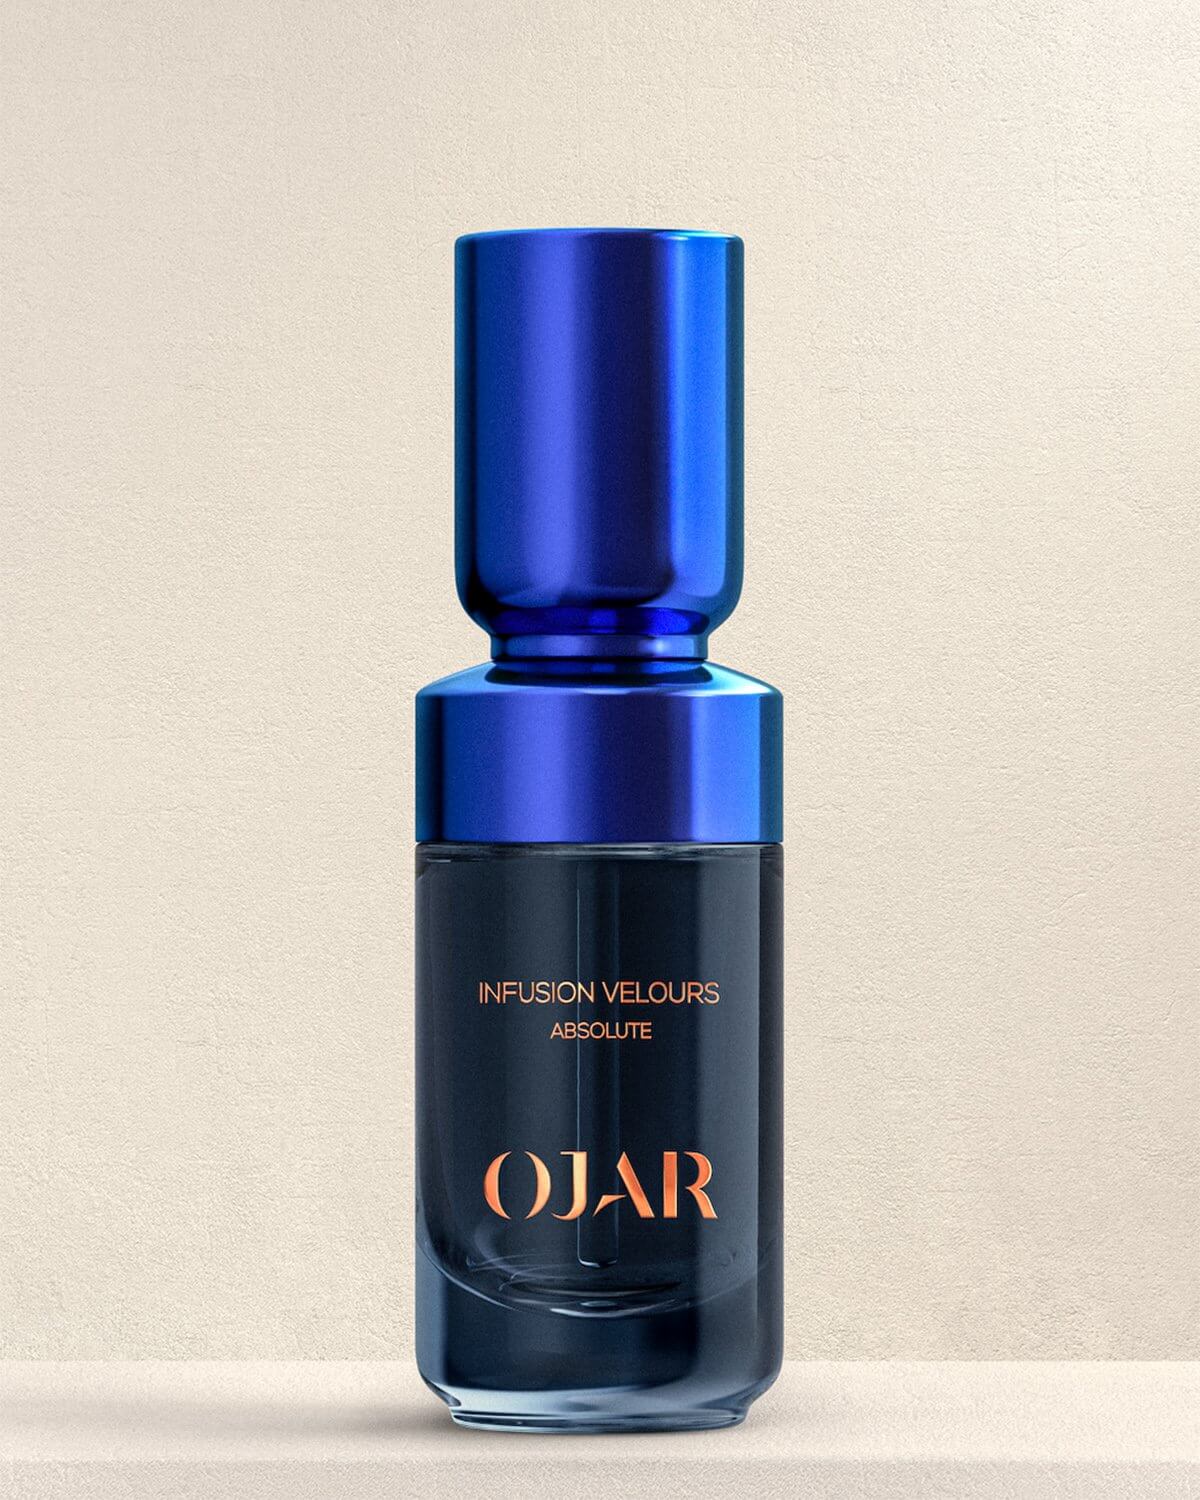 OJAR INFUSION VELOURS OIL